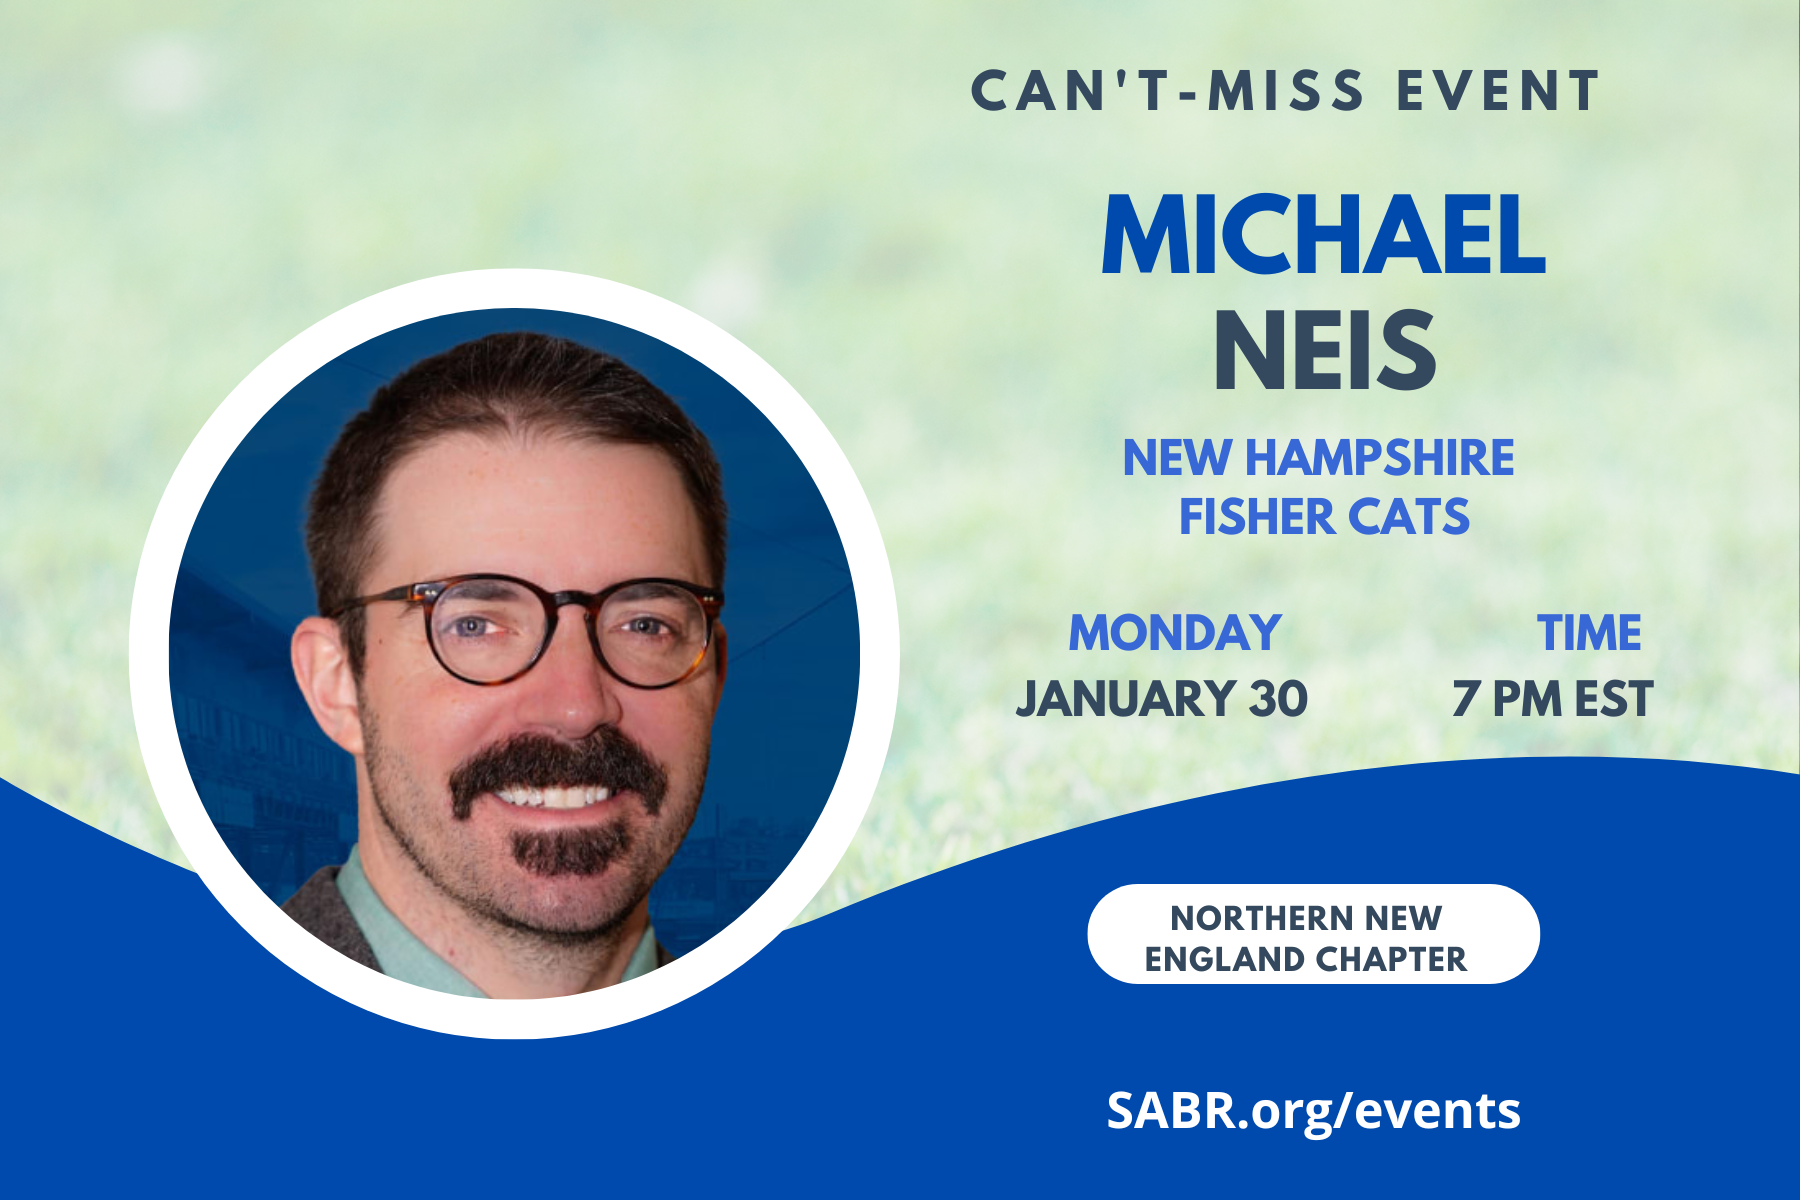 At 7:00 p.m. EST on Tuesday, January 30, SABR's Northern New England Chapter, in concert with the Gardner-Waterman Vermont Chapter, will host Michael Neis, the new General Manager of the New Hampshire Fisher Cats for a Zoom session. All baseball fans are welcome to attend.